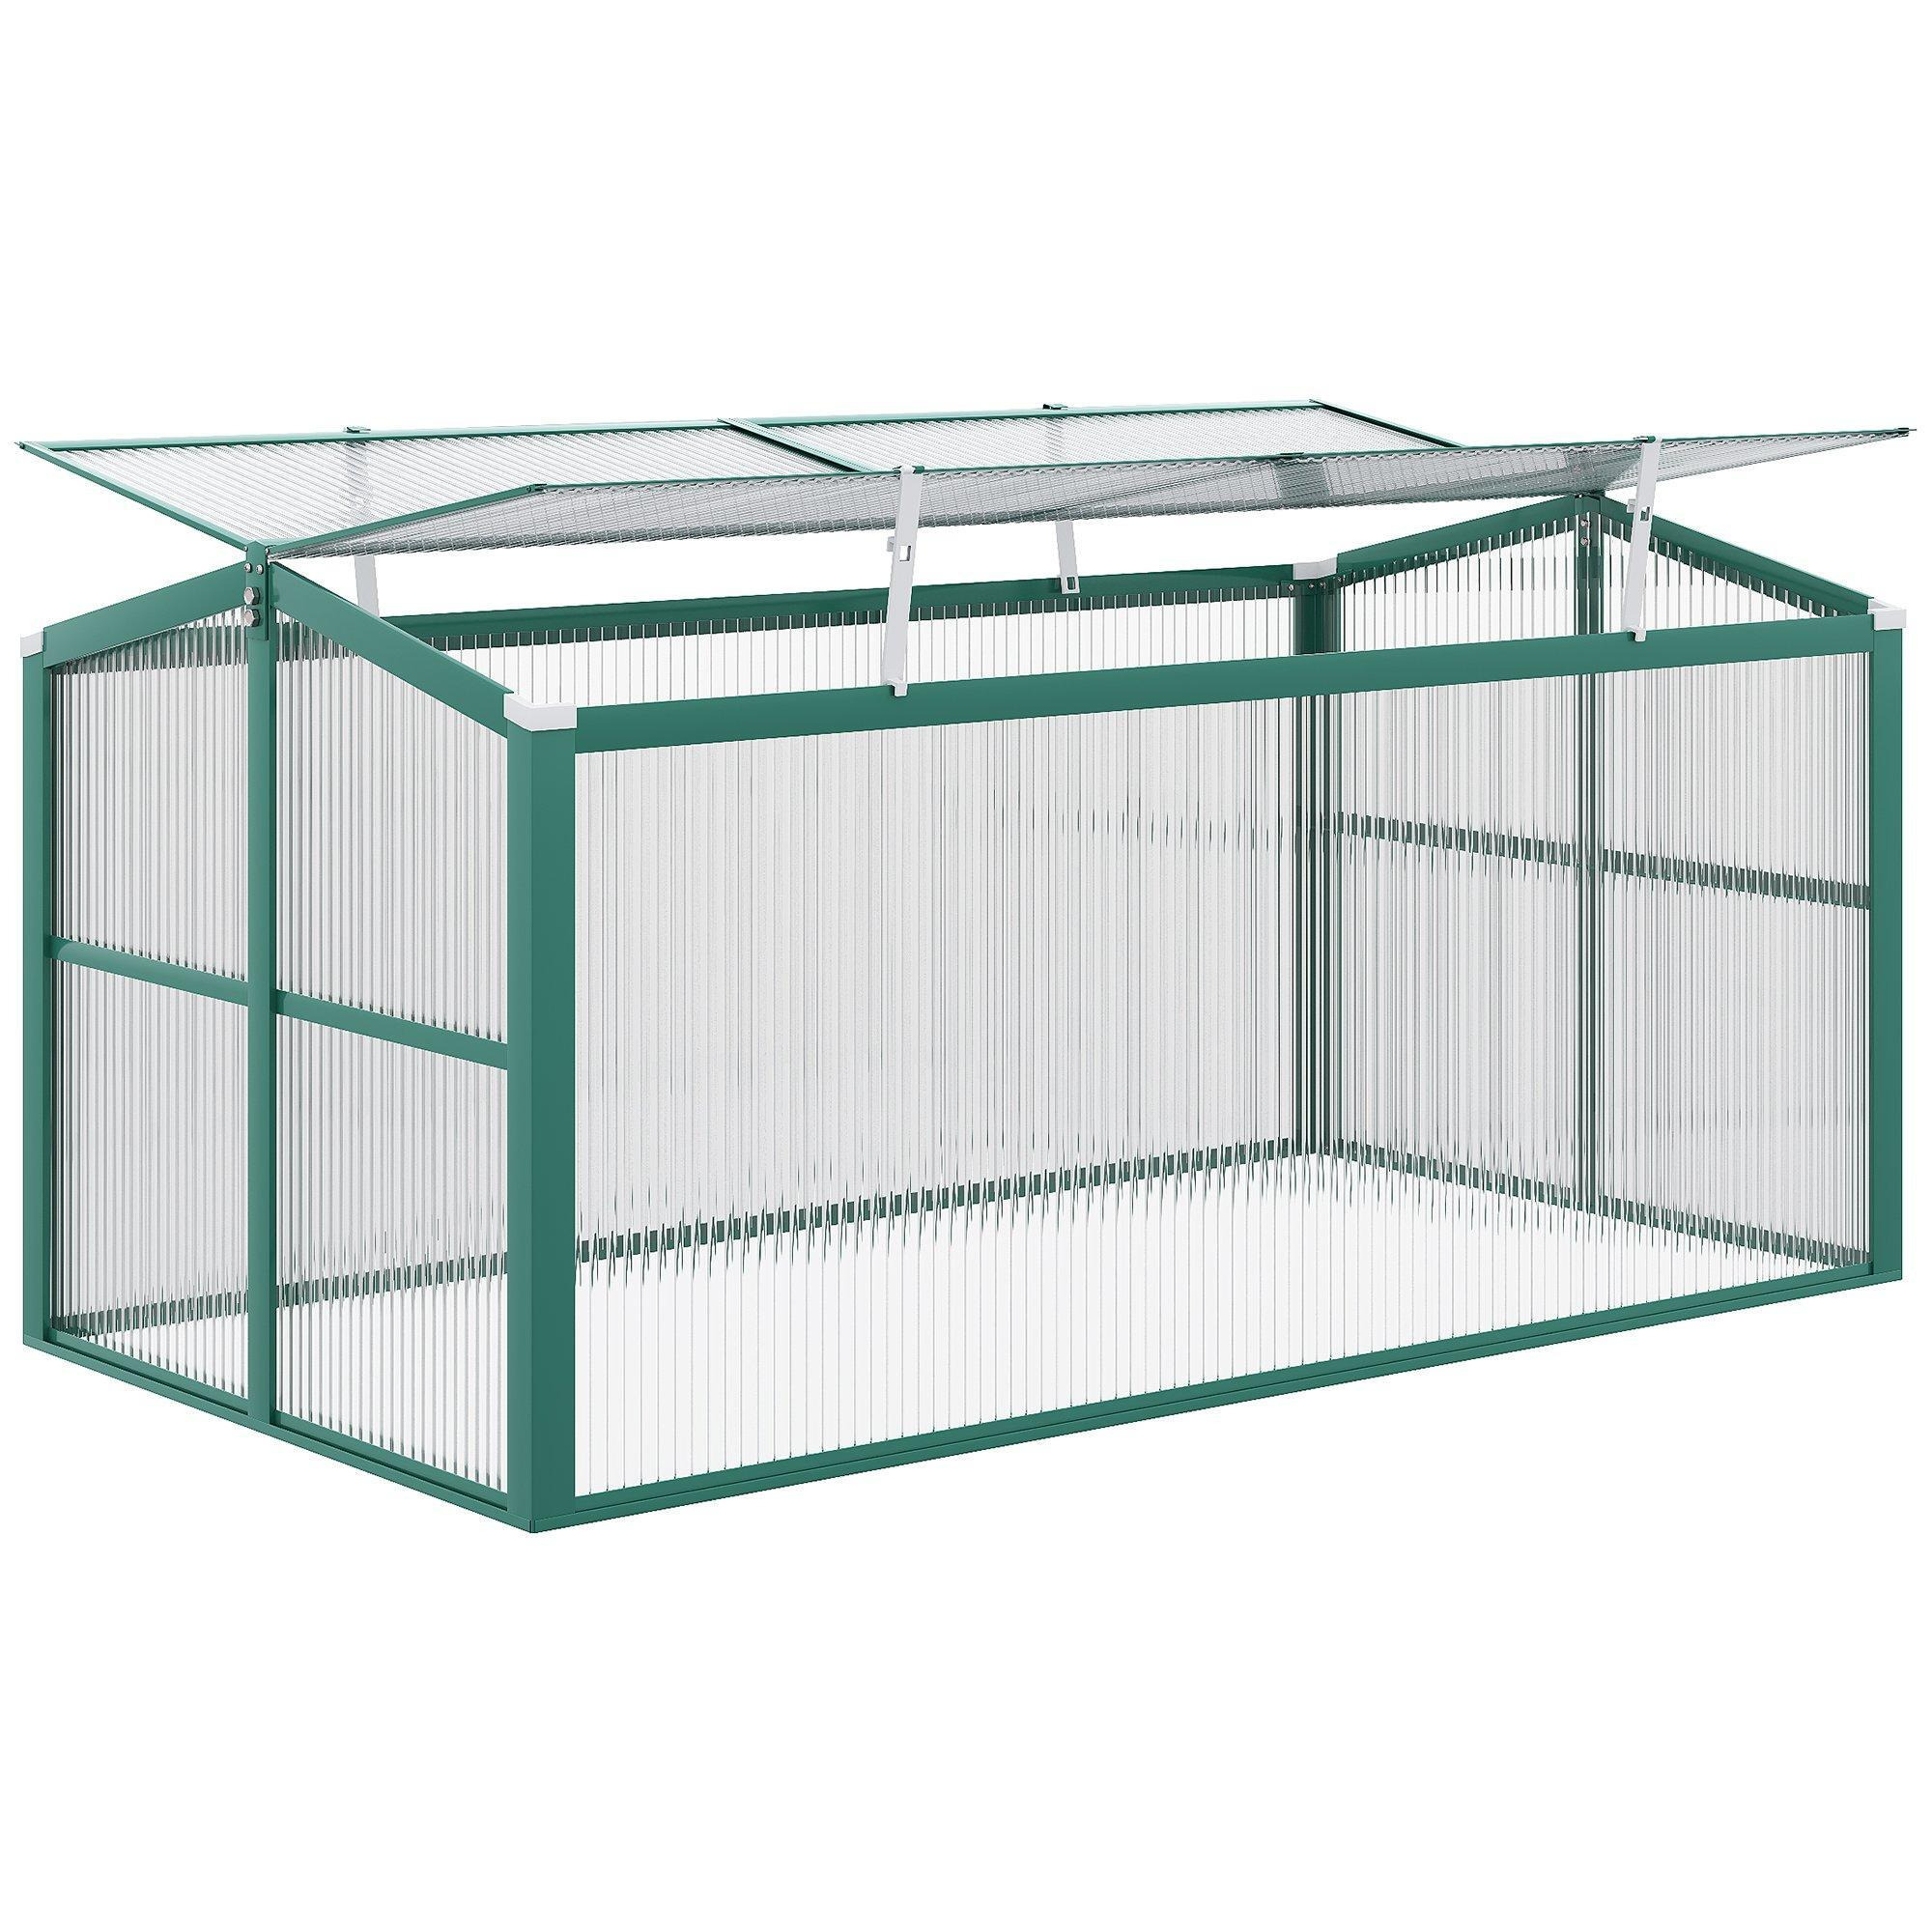 Aluminium Cold Frame Greenhouse Planter with Openable Top 130x70x61cm - image 1